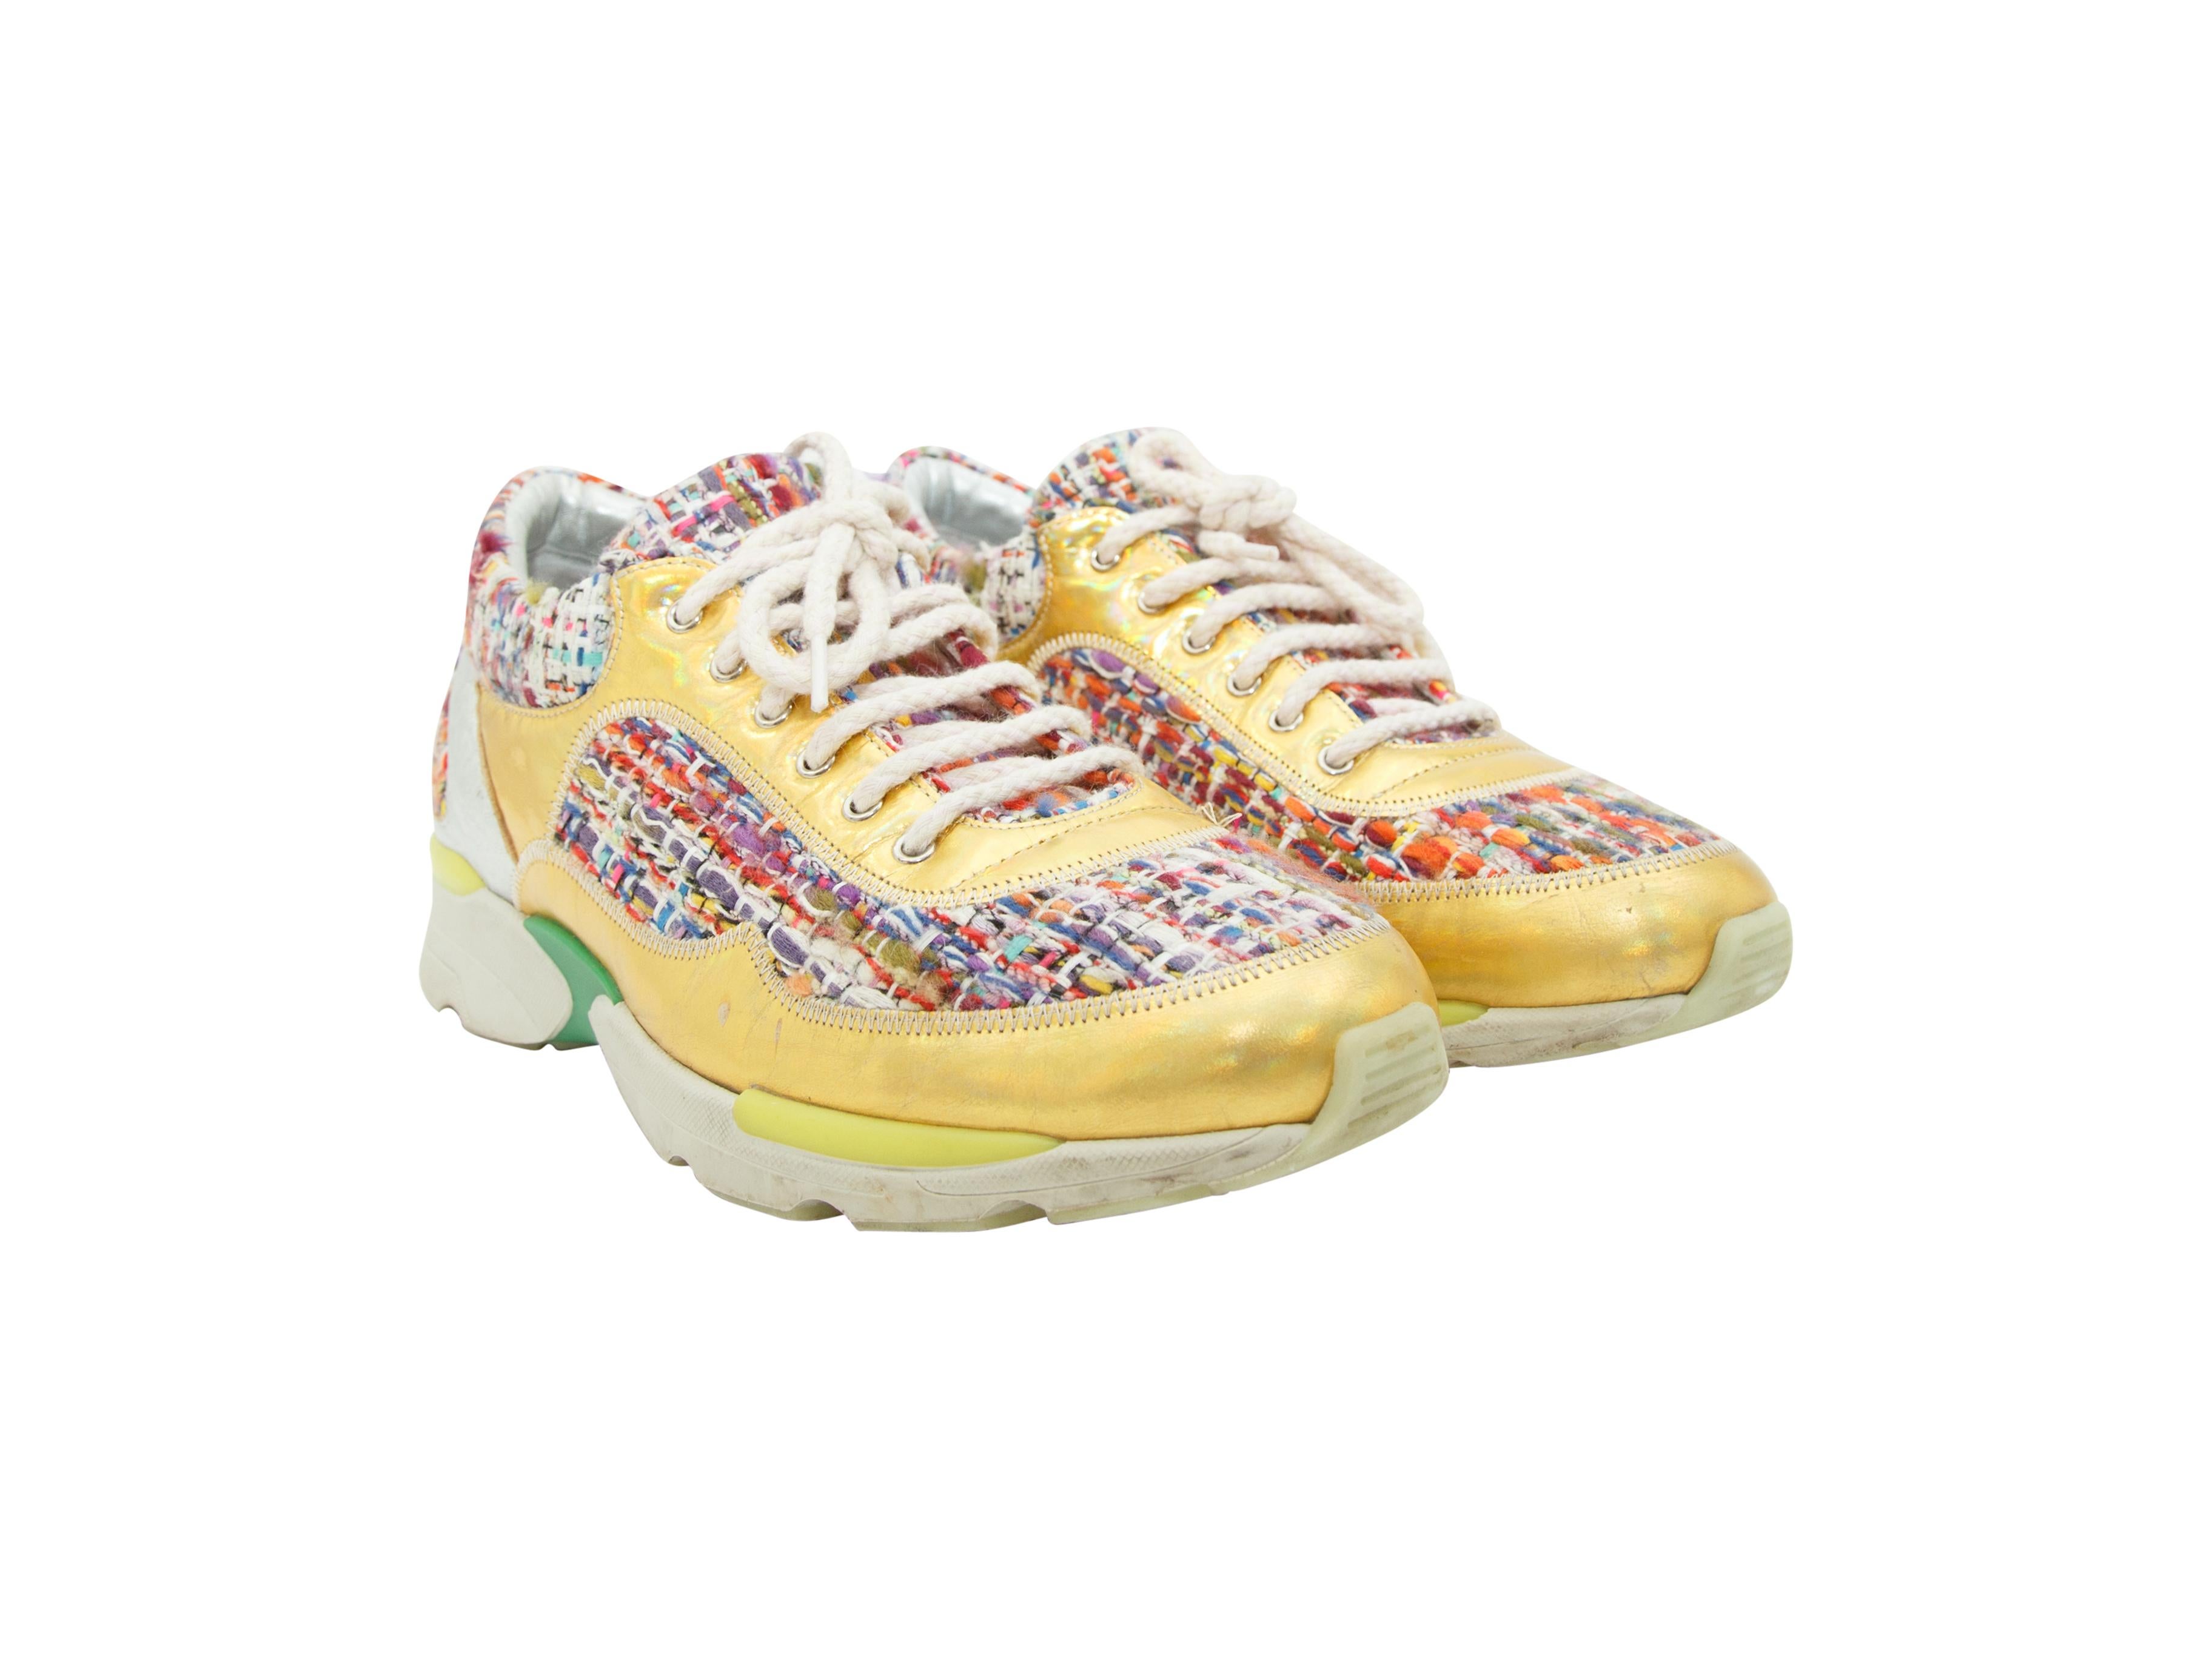 Product details:  Multicolor tweed sneakers by Chanel.  Trimmed with iridescent yellow leather.  Lace-up closure.  Round toe.  
Condition: Pre-owned. Very good.
Est. Retail $ 995.00